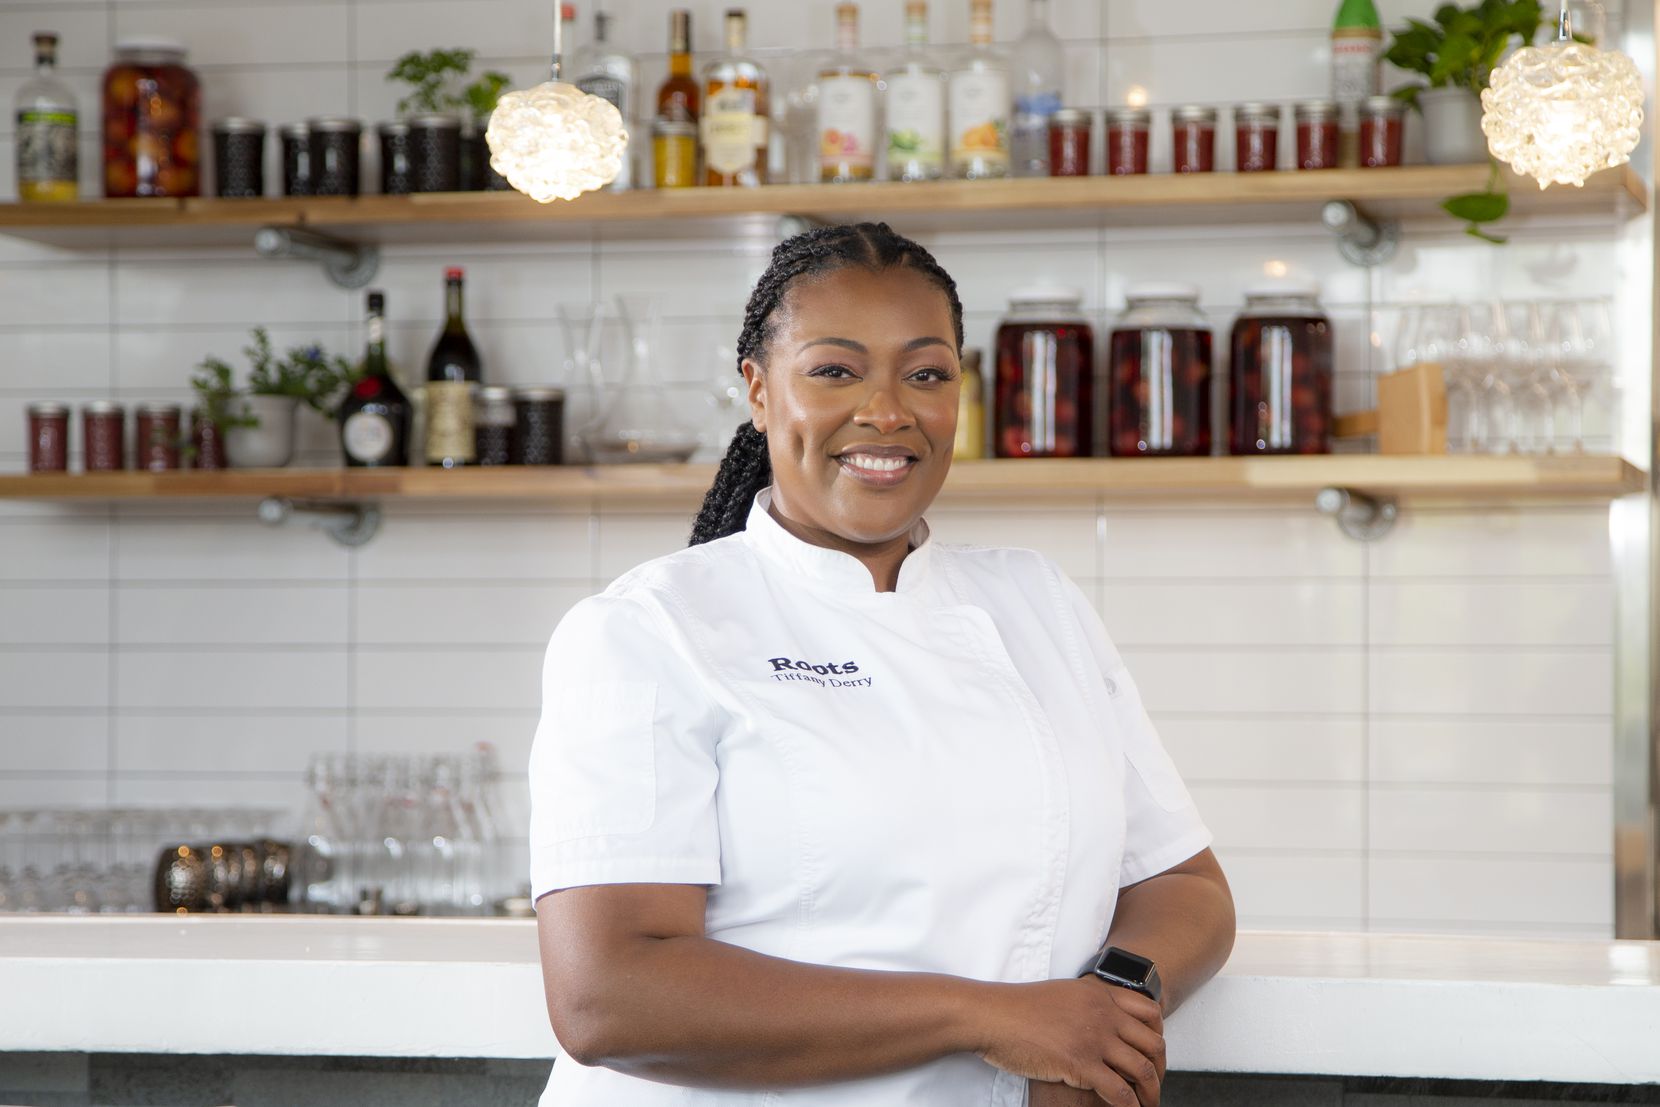 Dallas-area chef Tiffany Derry now offering a gumbo meal kit you